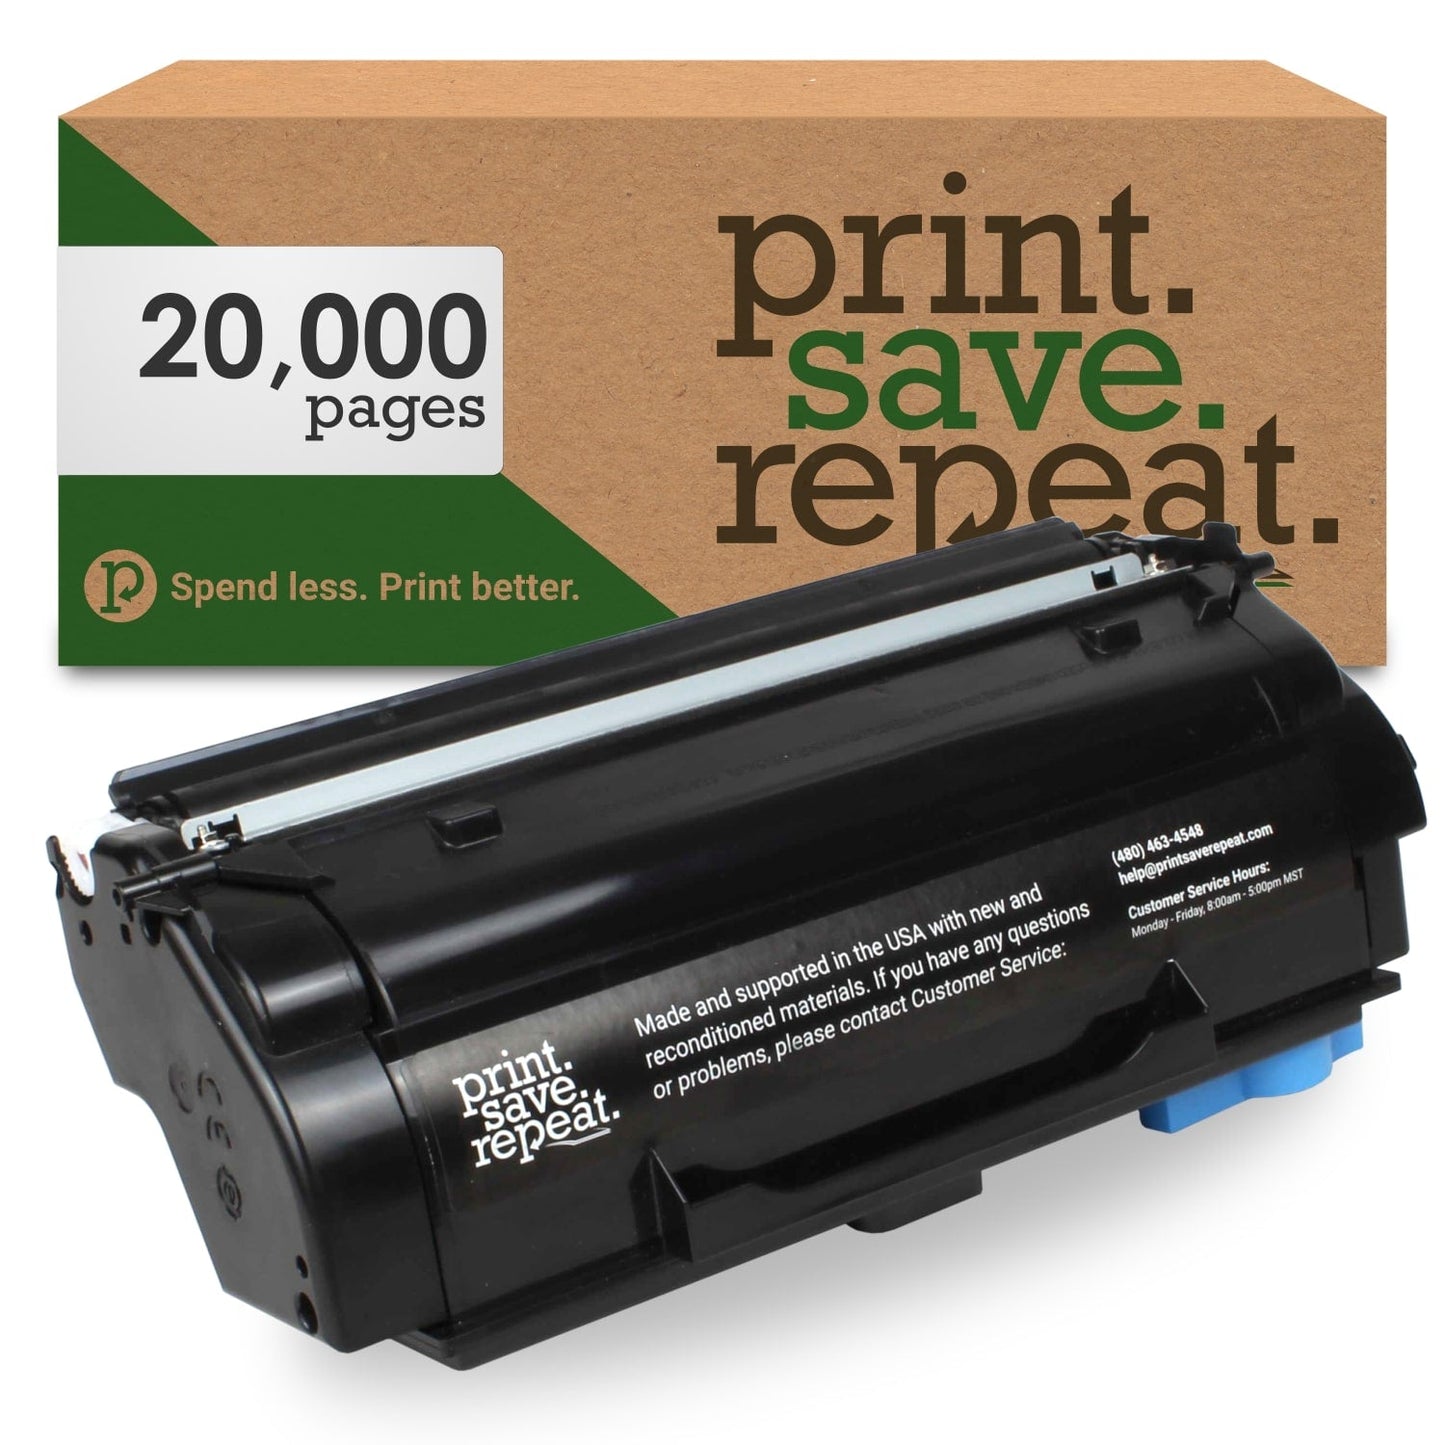 Print.Save.Repeat. Lexmark 55B0XA0 Extra High Yield Remanufactured Toner Cartridge for MS431, MX431 [20,000 Pages]